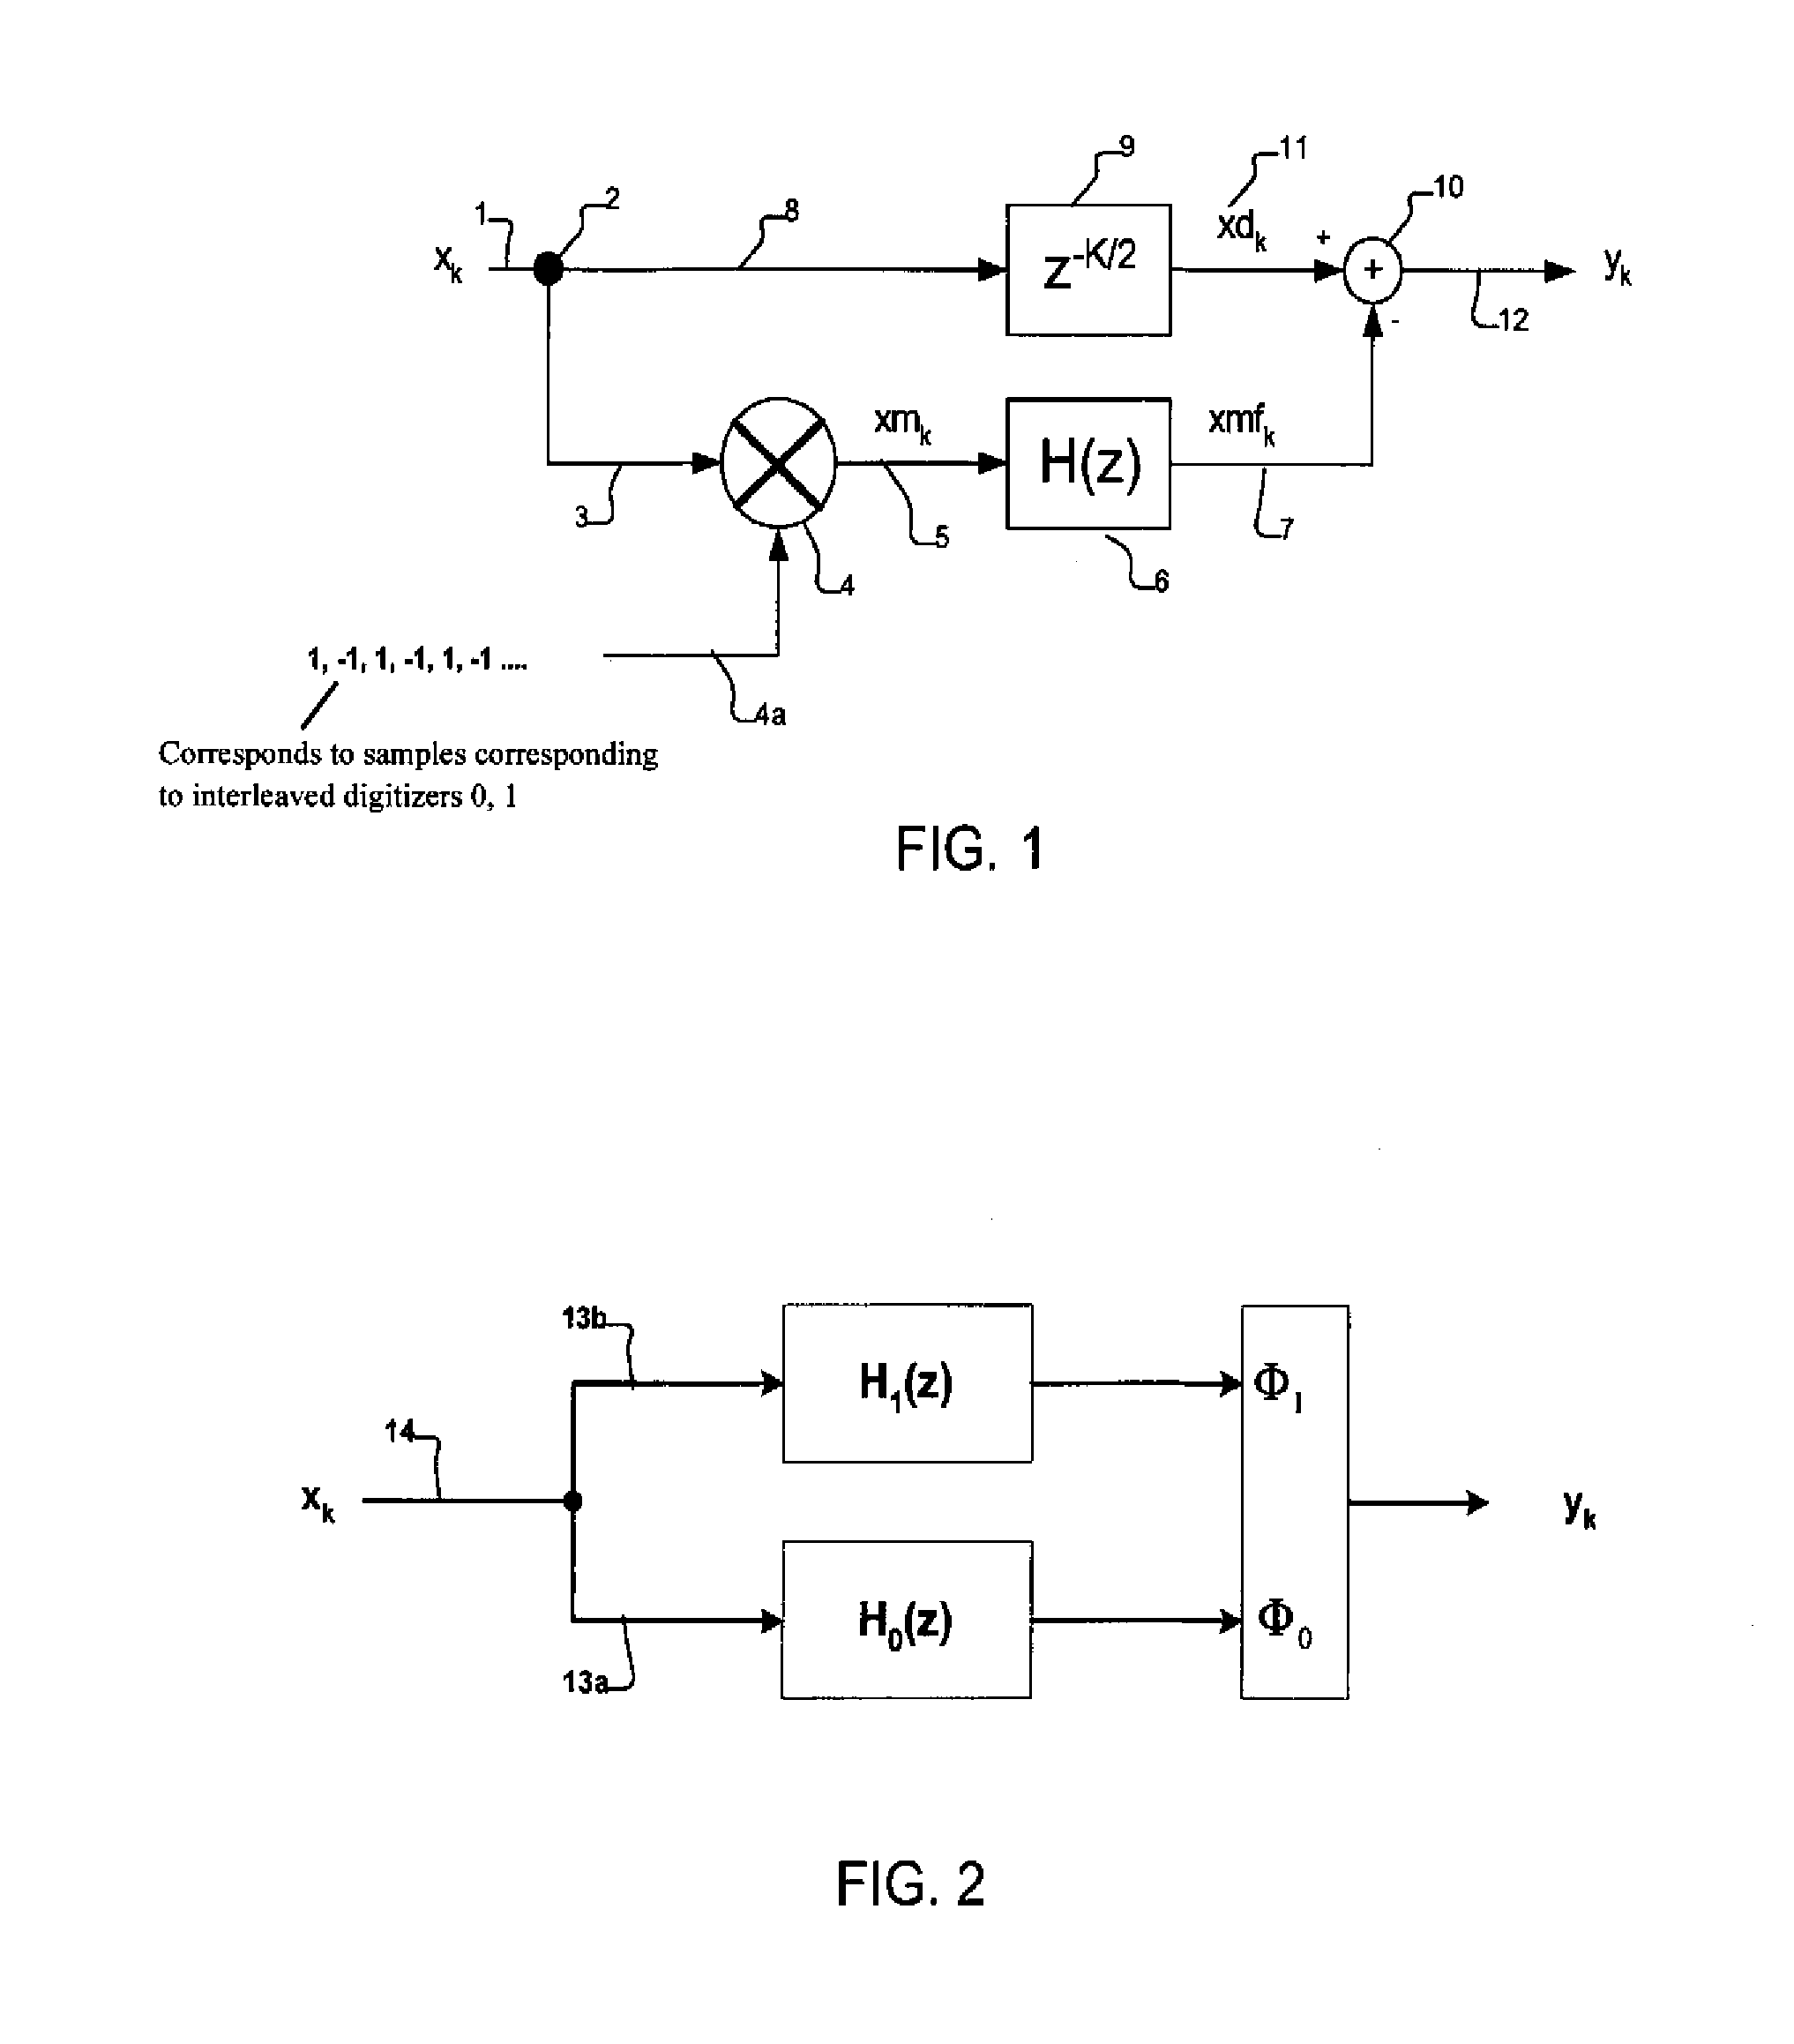 Method and apparatus for artifact signal reduction in systems of mismatched interleaved digitizers